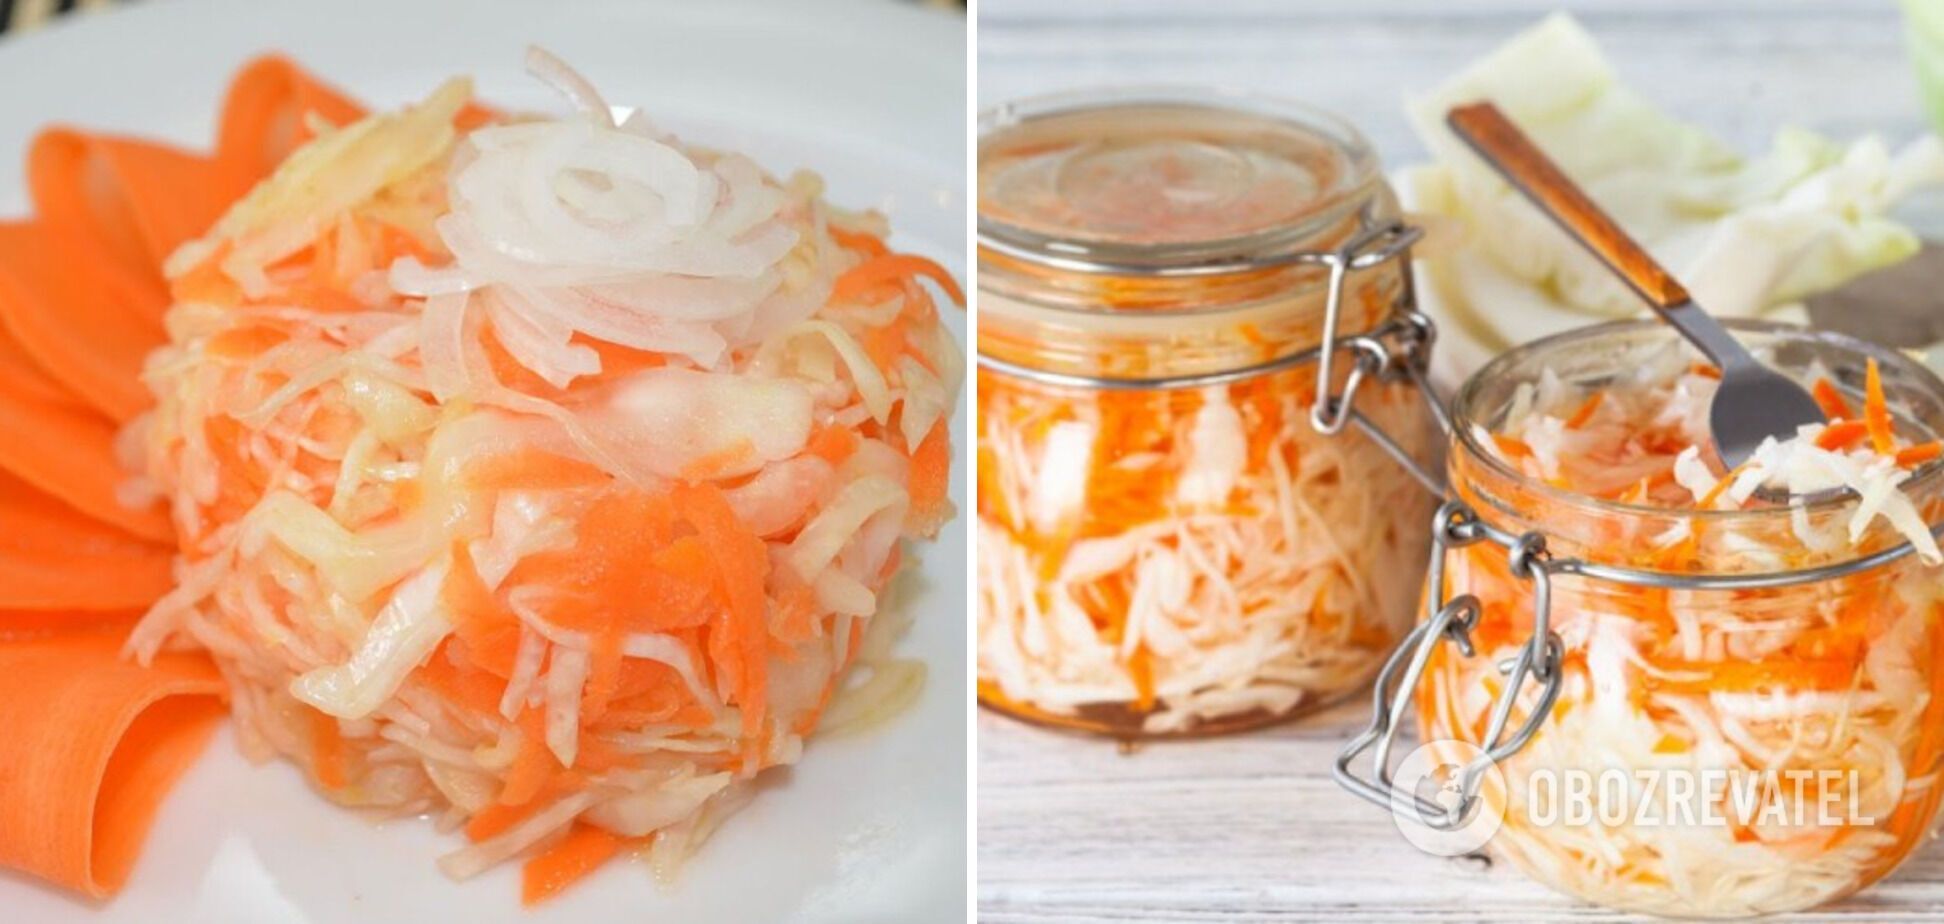 Pickled cabbage with carrots